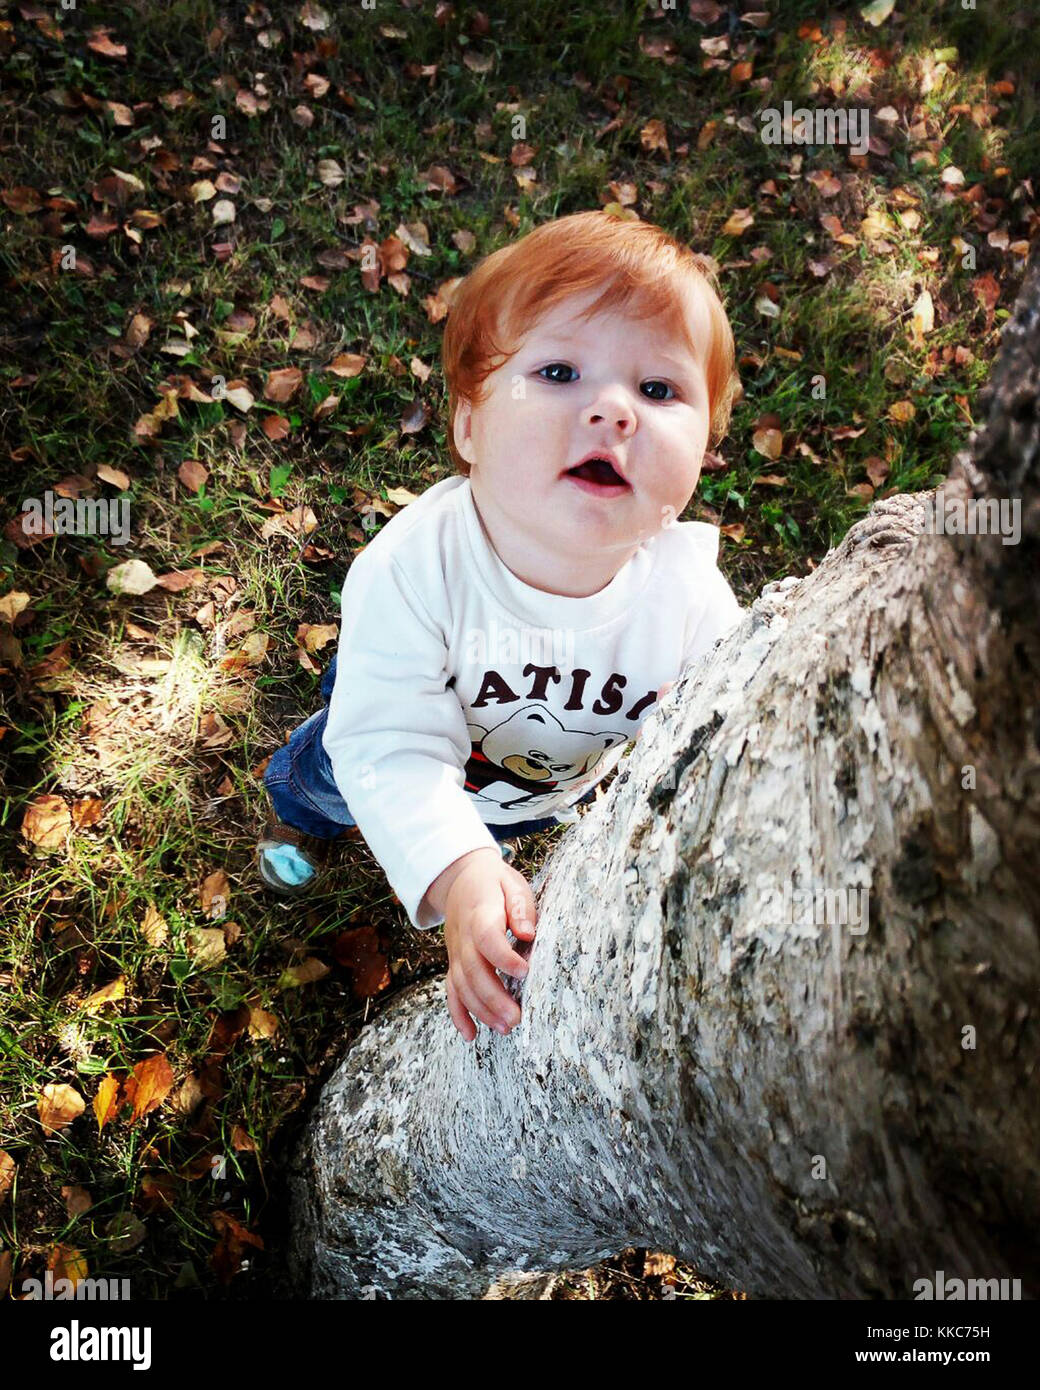 Cute little baby with ginger hair, blue eyes and opened mouth embracing birch tree watching from down to up on autumn background. Stock Photo